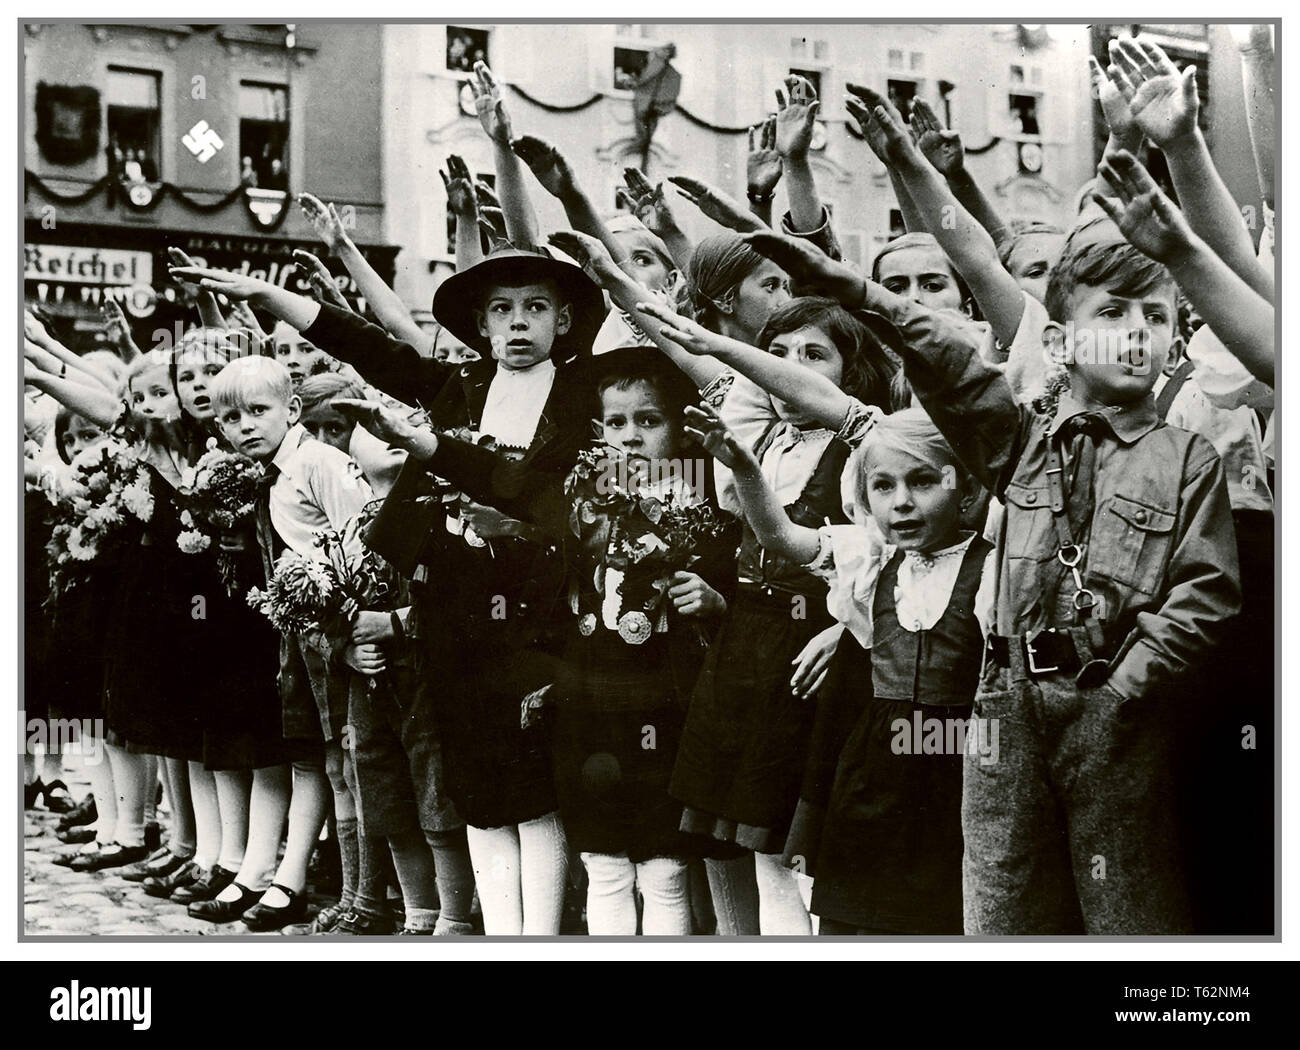 AUSTRIAN CHILDREN HEIL HITLER SALUTE 1930's Nazi Propaganda image of Austrian children group welcoming Adolf Hitler with traditional Heil Hitler salute with arms raised. Swastika symbol on wall in background Sudetenland Stock Photo